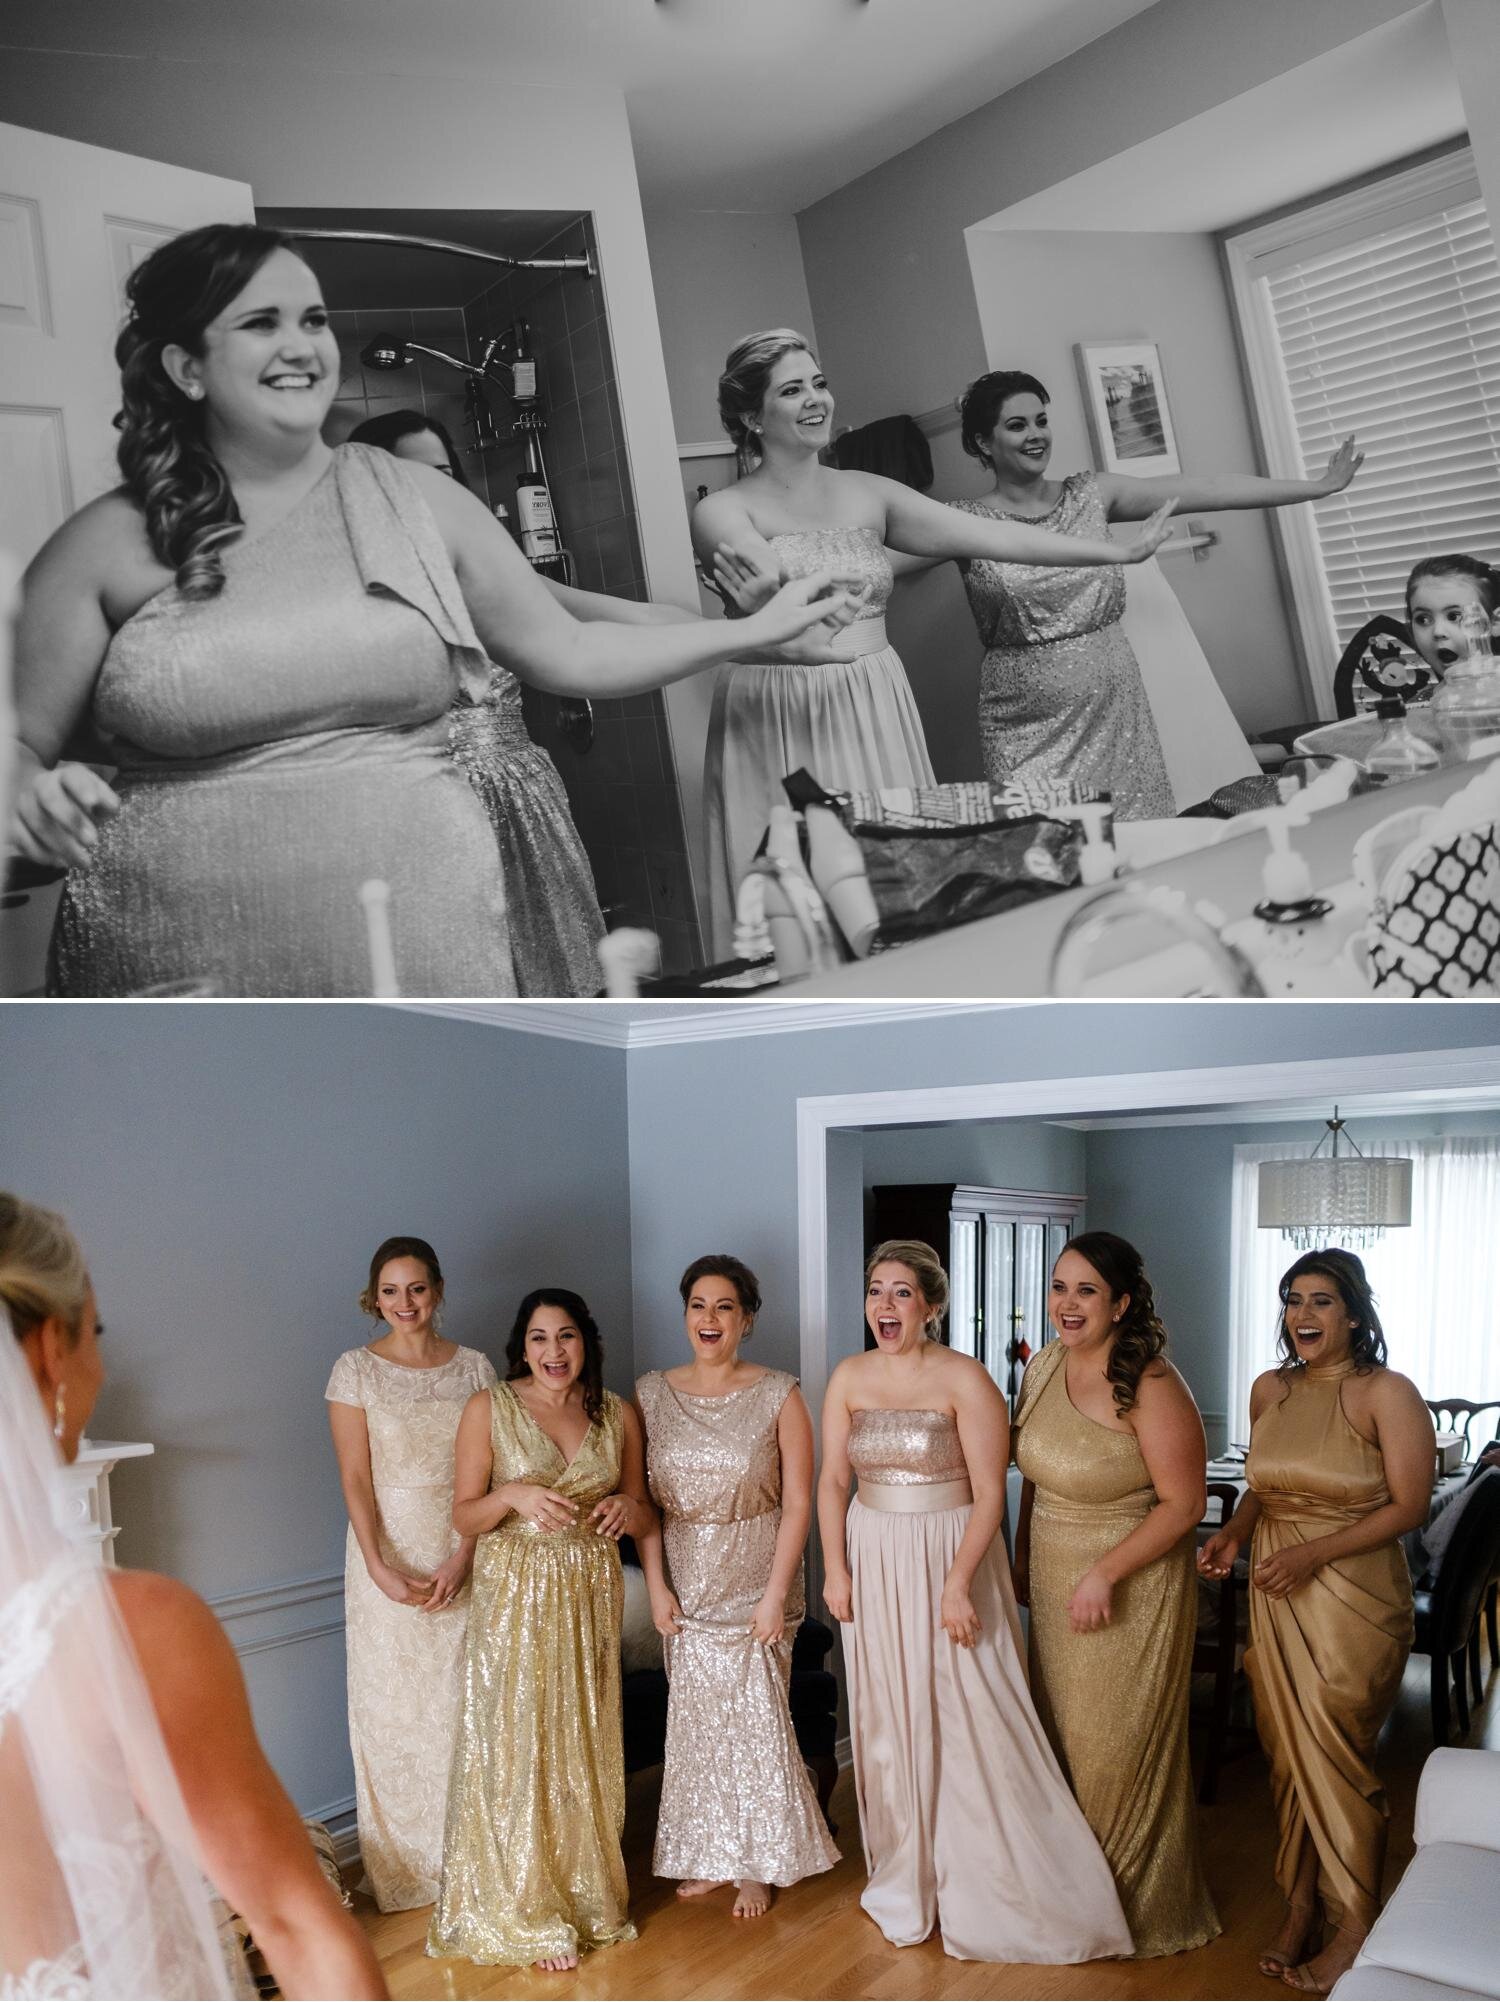 photographs of bridesmaids seeing the bride in her dress for the first time